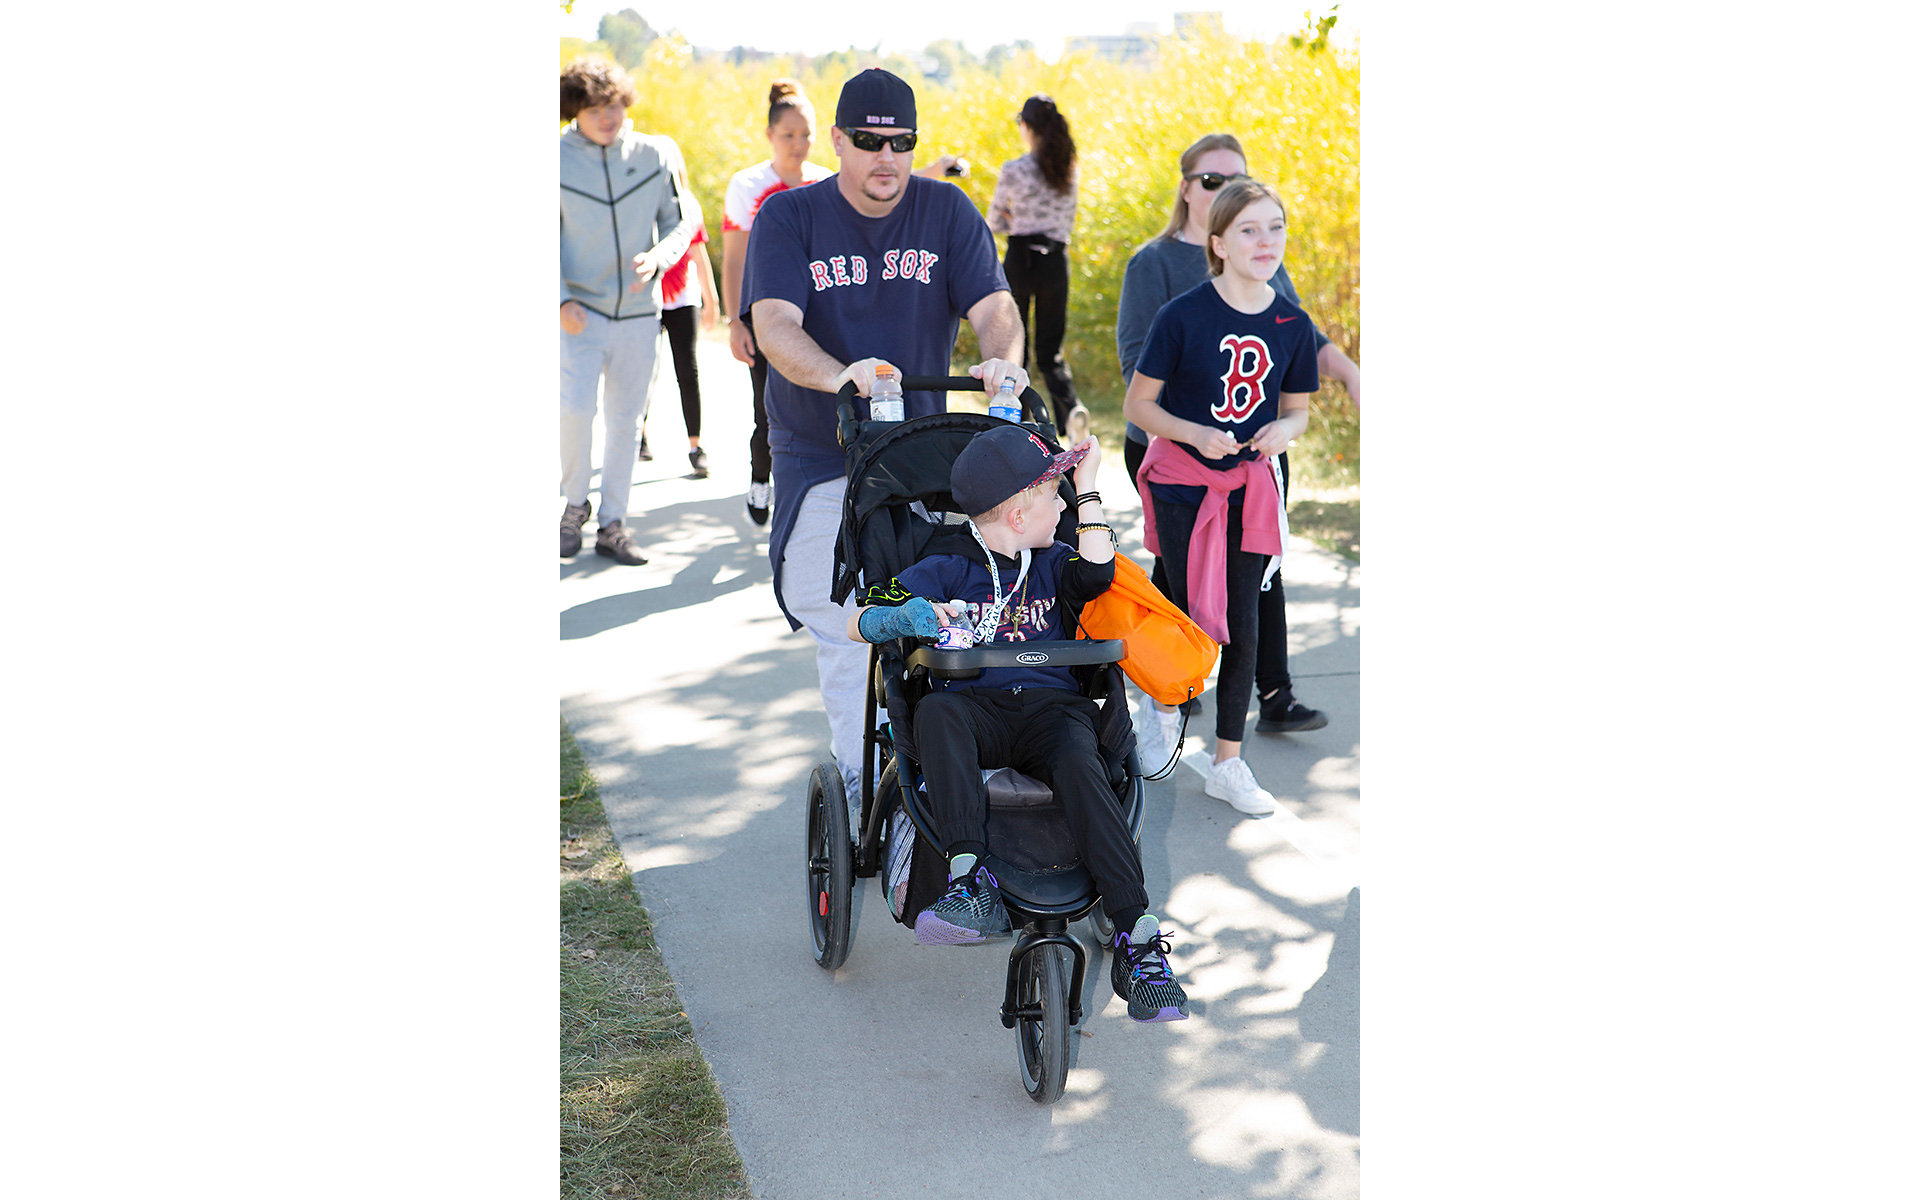 Walking at the ALS event.